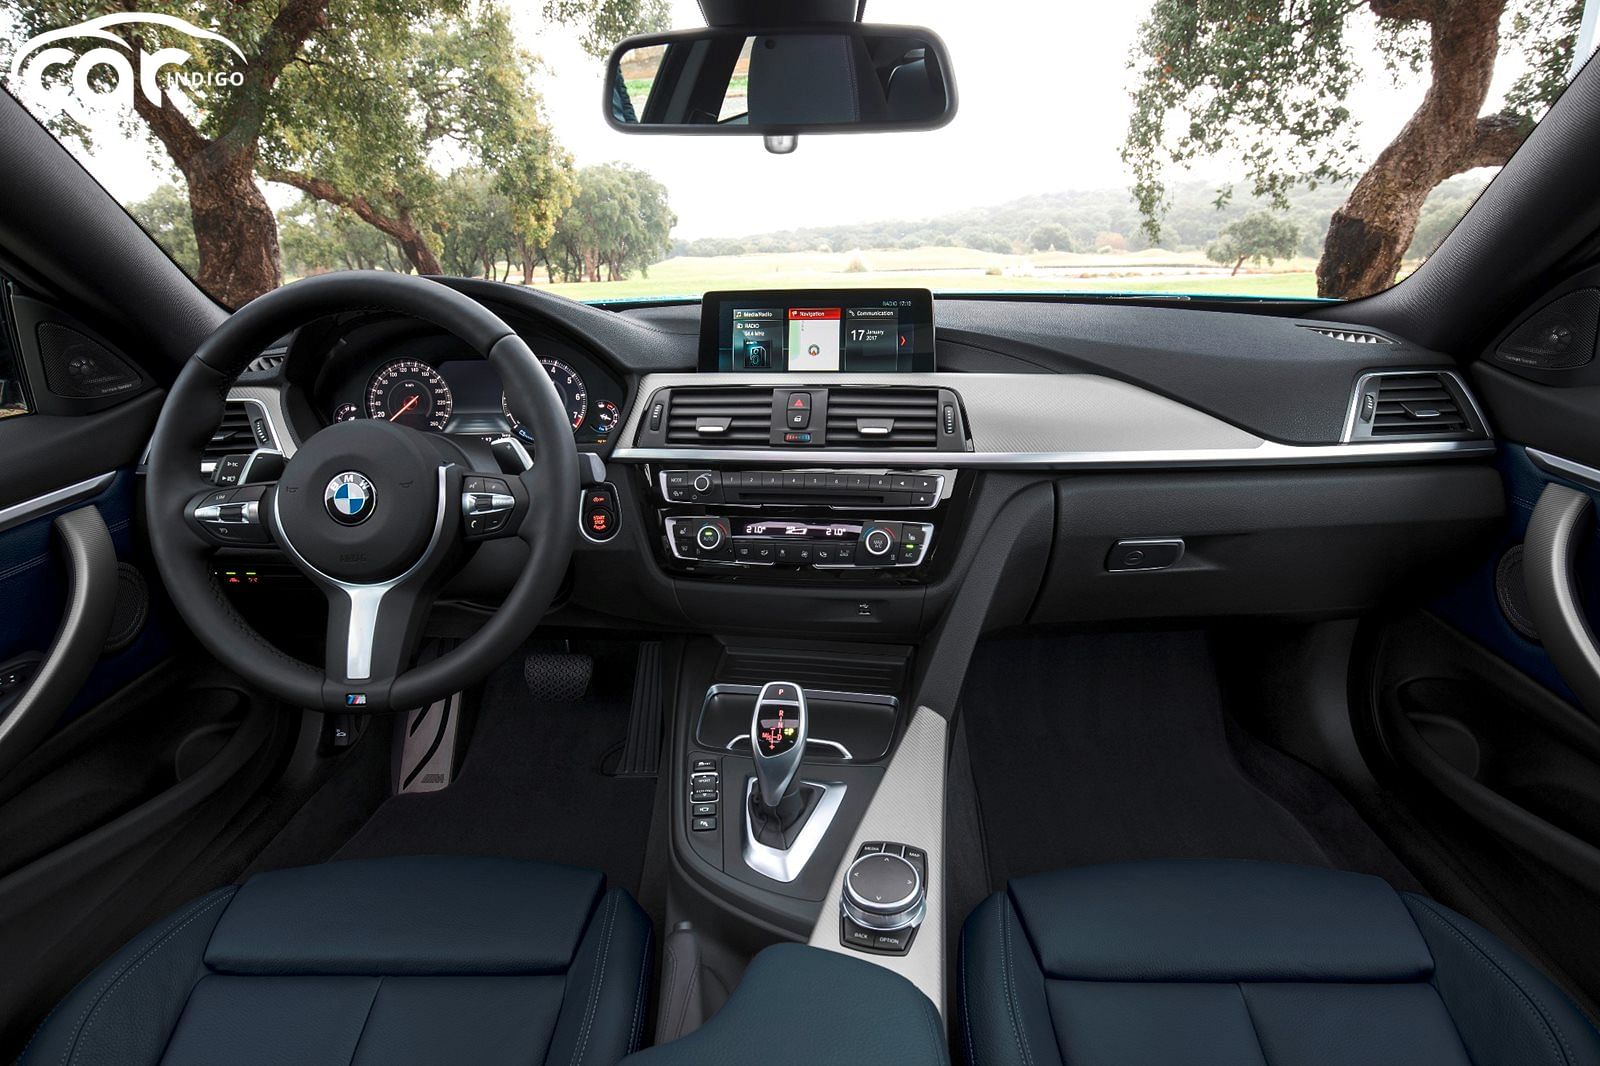 2018 BMW 4 Series Gran Coupe Interior Review - Seating, Infotainment,  Dashboard and Features | CarIndigo.com